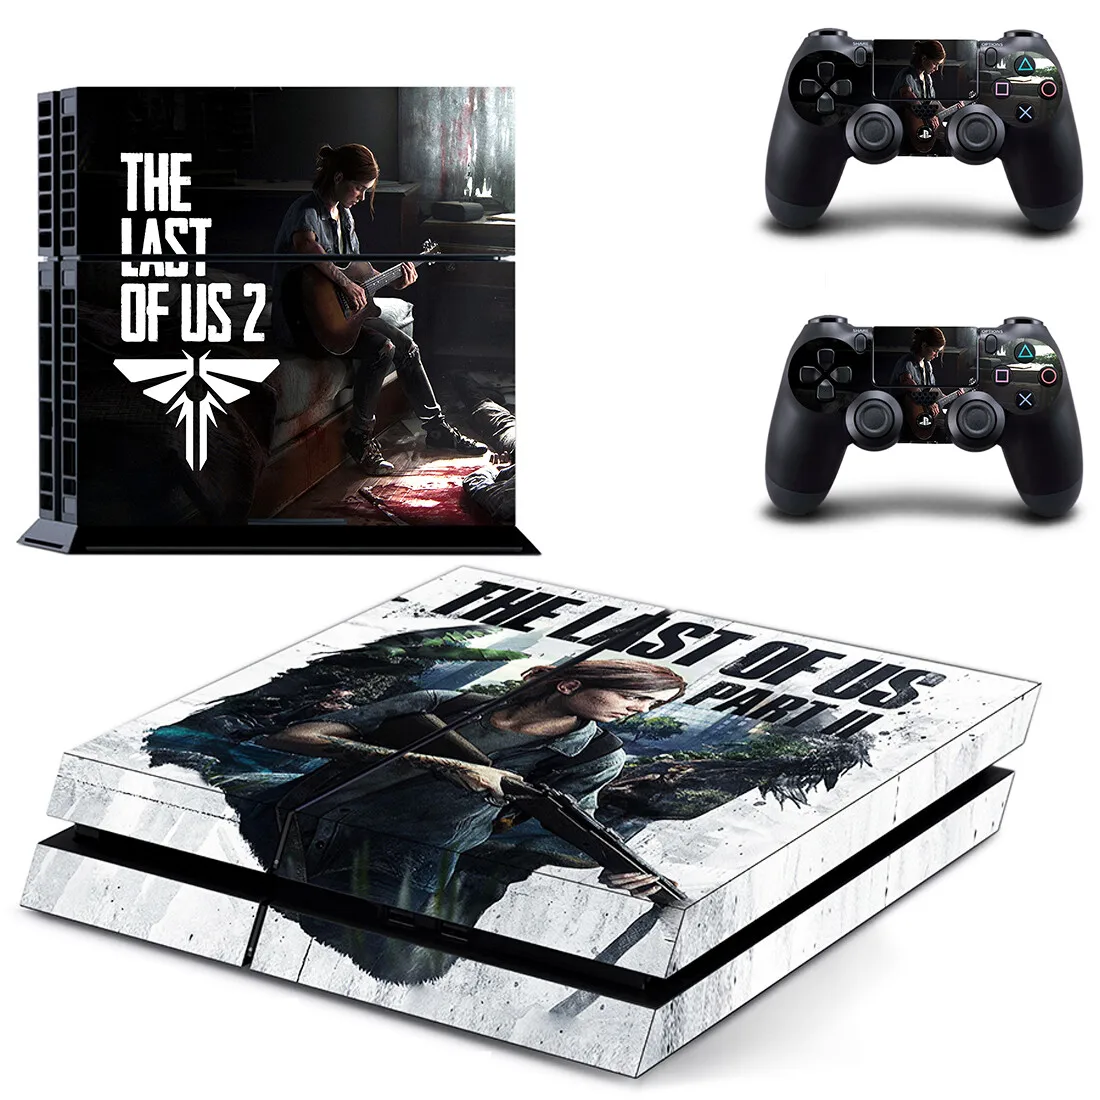 The Last of Us PS4 Stickers Play station 4 Skin Sticker Decals Cover For PlayStation 4 PS4 Console & Controller Skins Vinyl